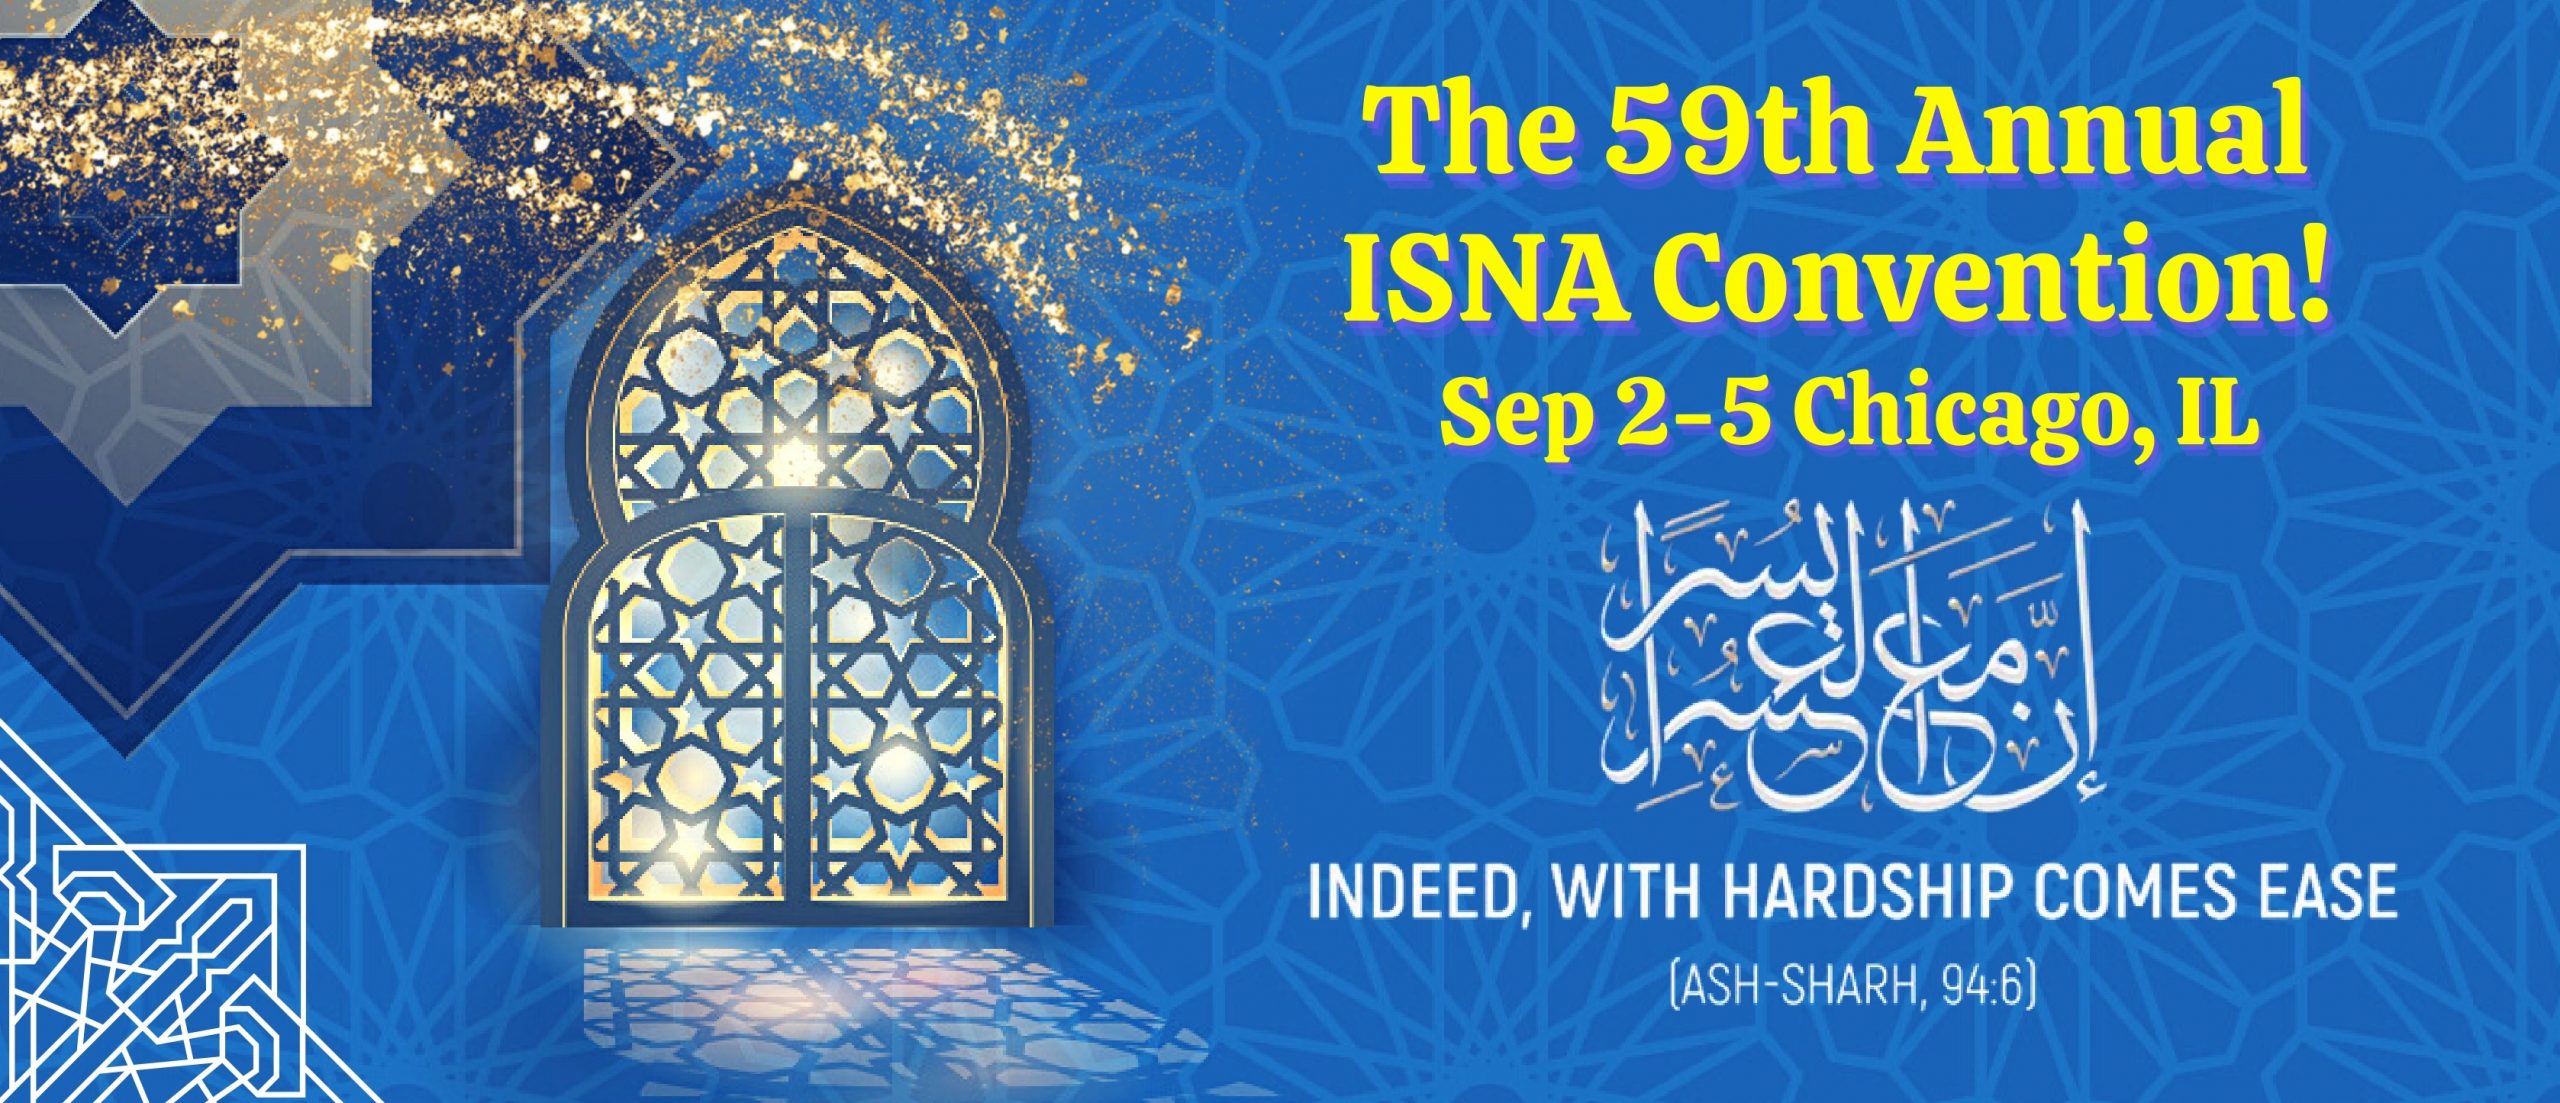 ISNA Convention Returns to Chicago after COVID19 About Islam